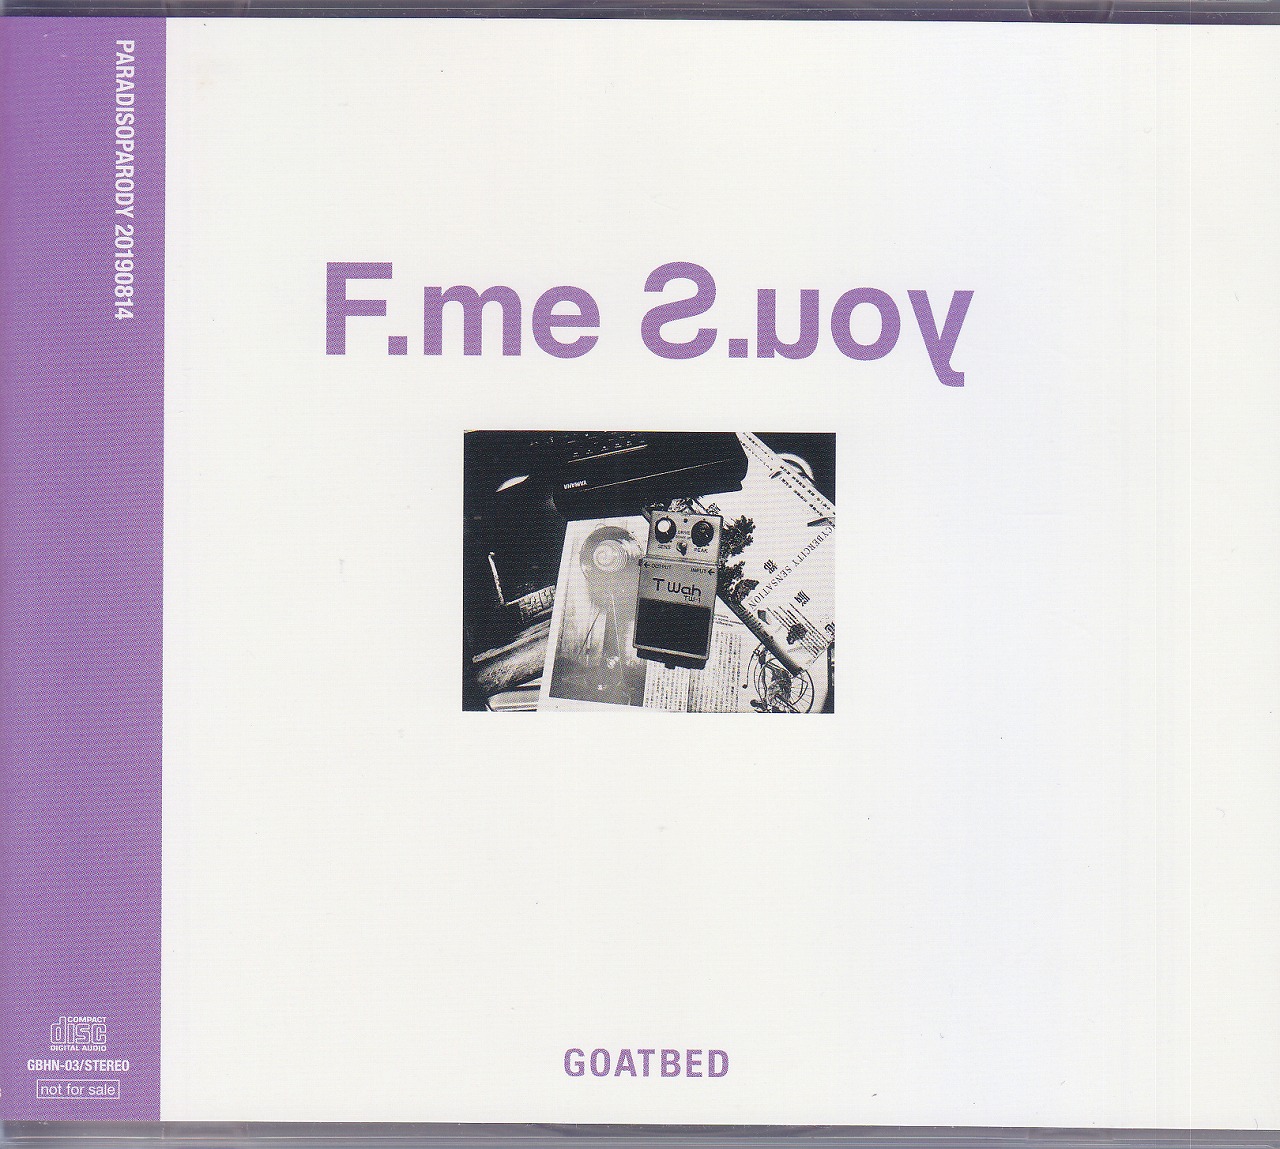 GOATBED ( ゴートベッド )  の CD F.me S.you